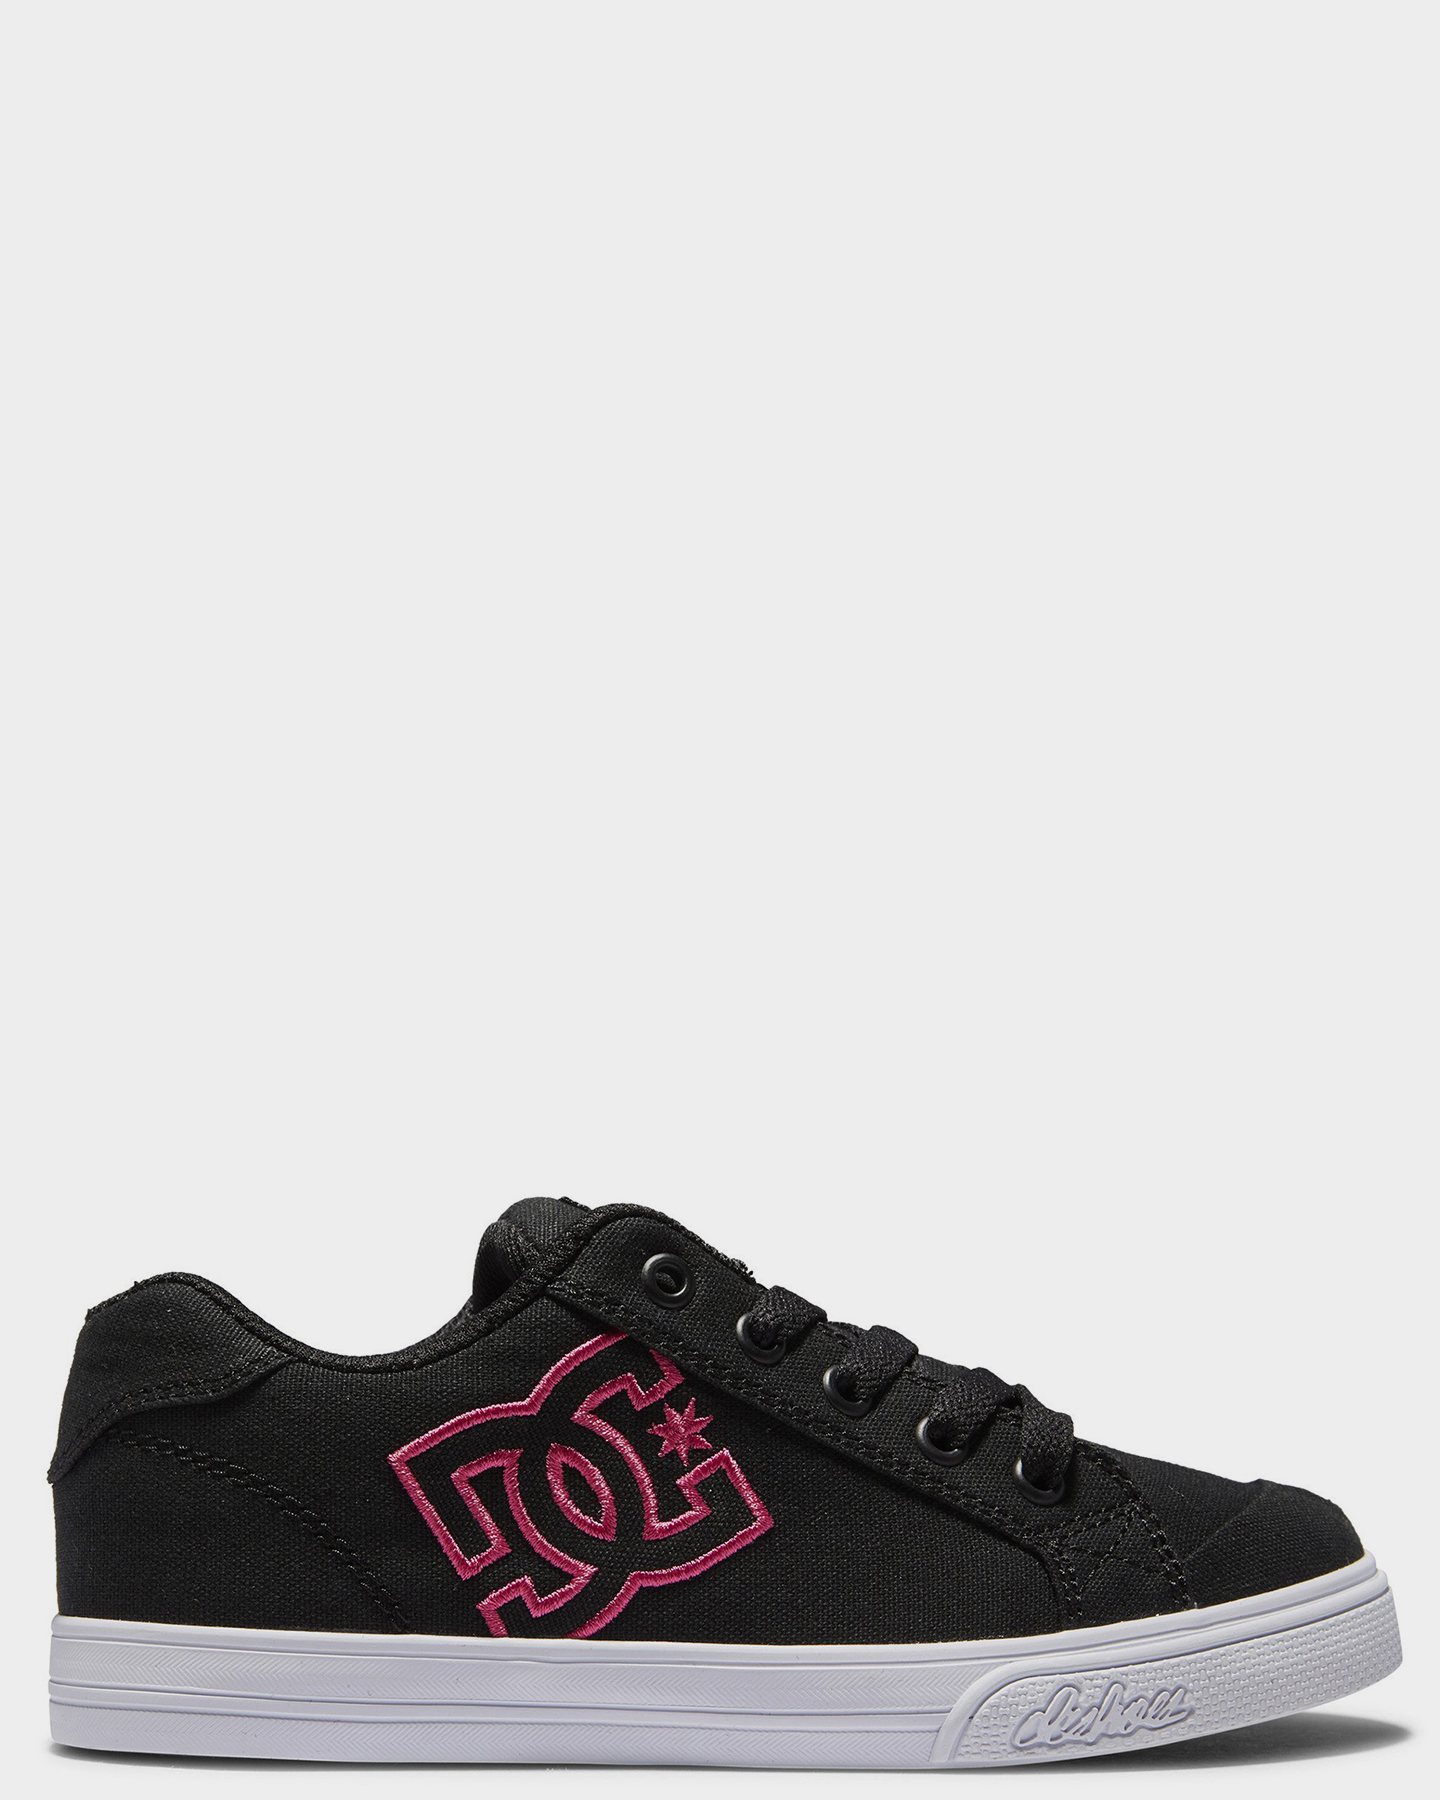 New Dc Shoes Chelsea Black And Pink Size 4.5 Youth